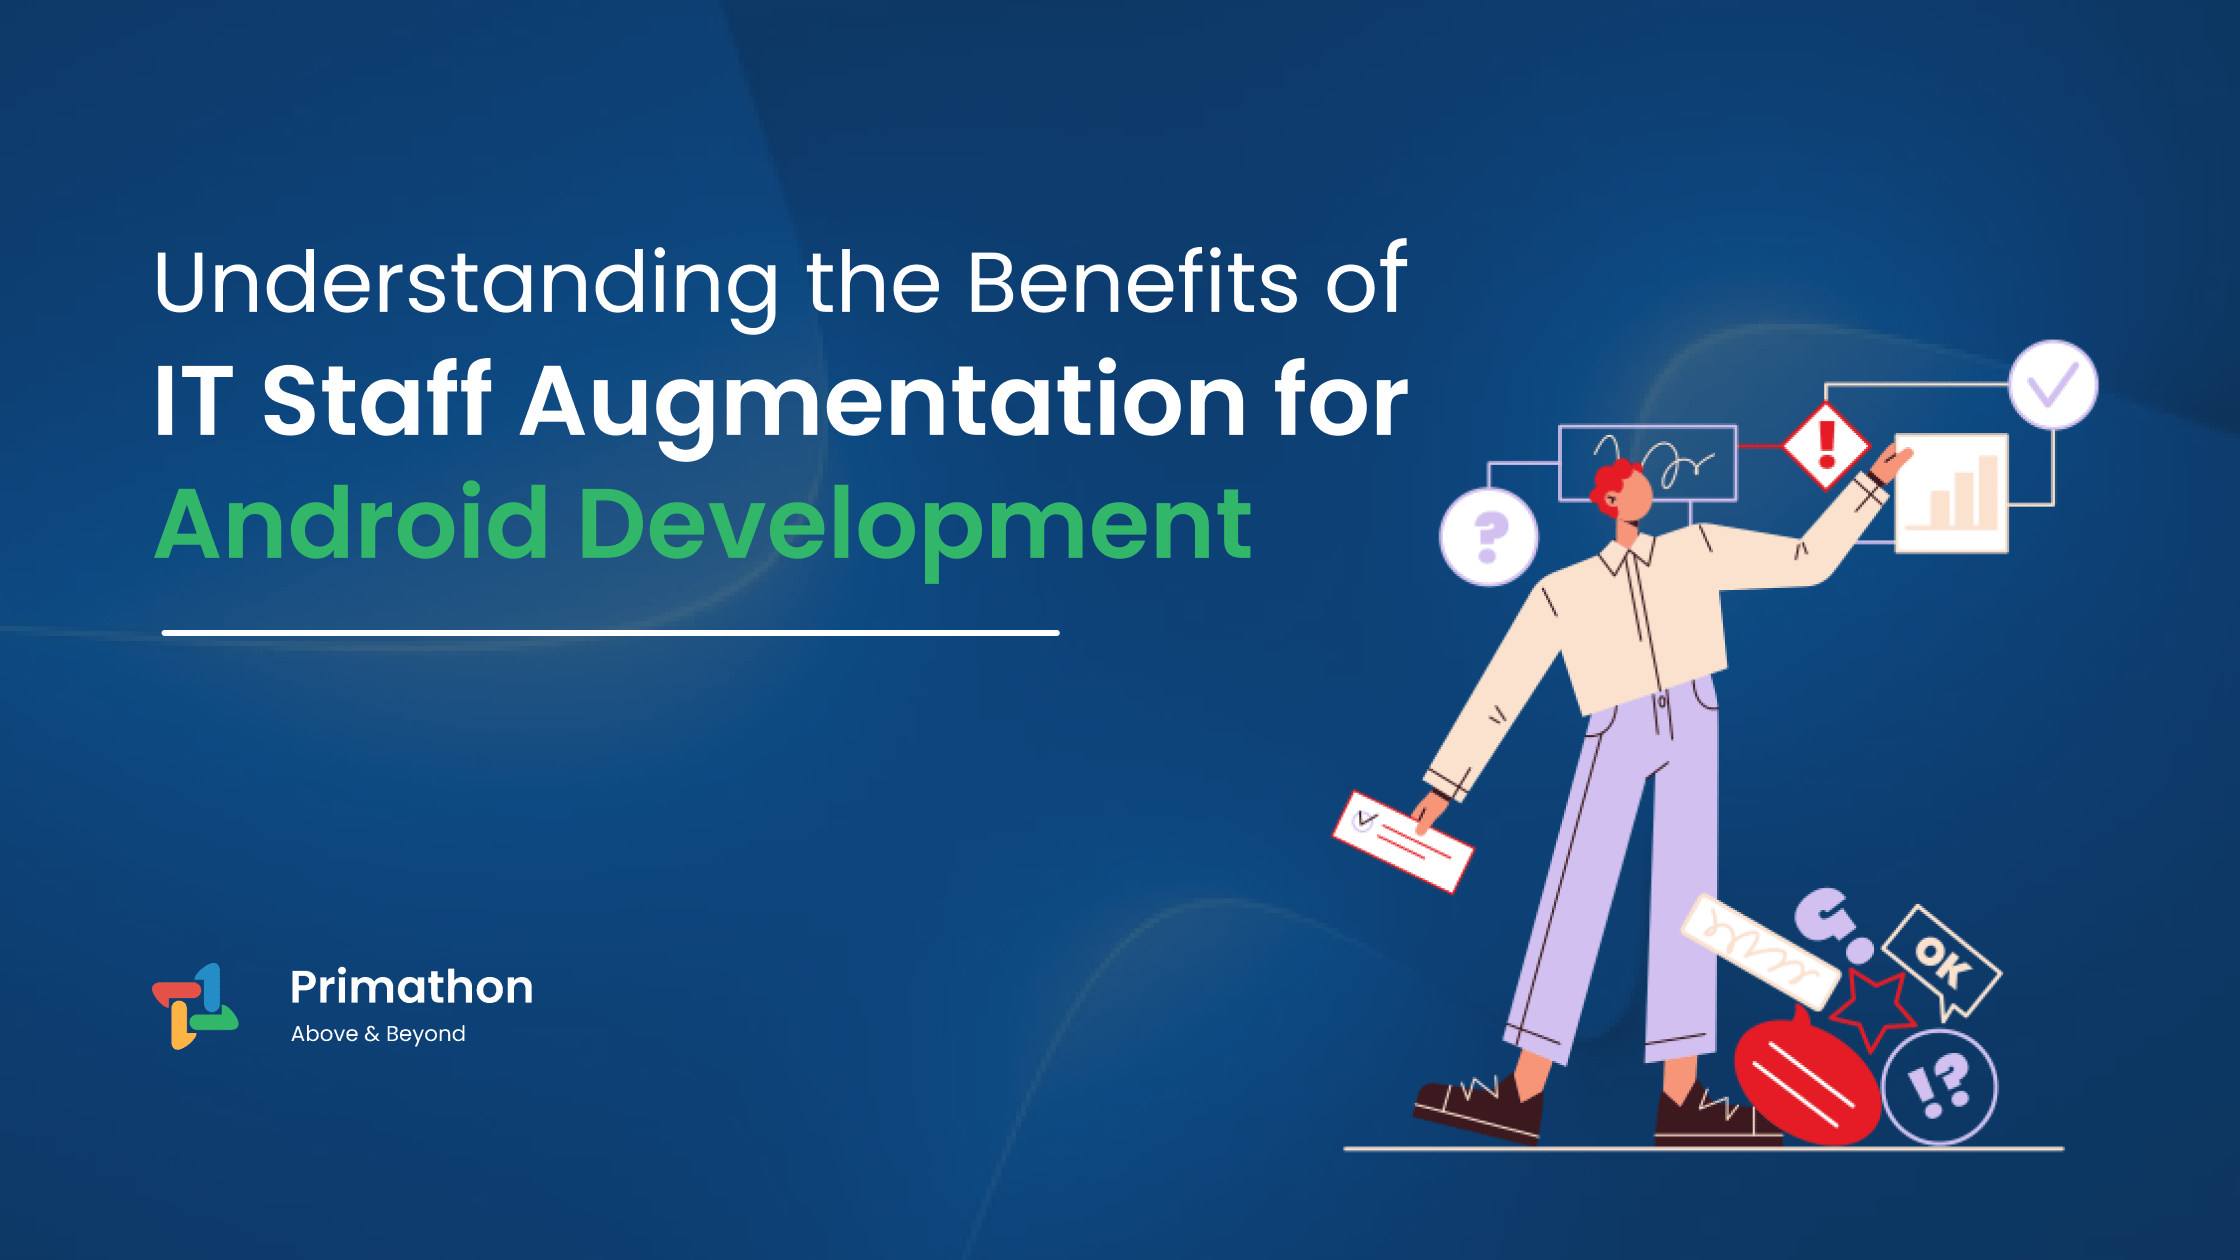 Understanding the Benefits of IT Staff Augmentation for Android Development